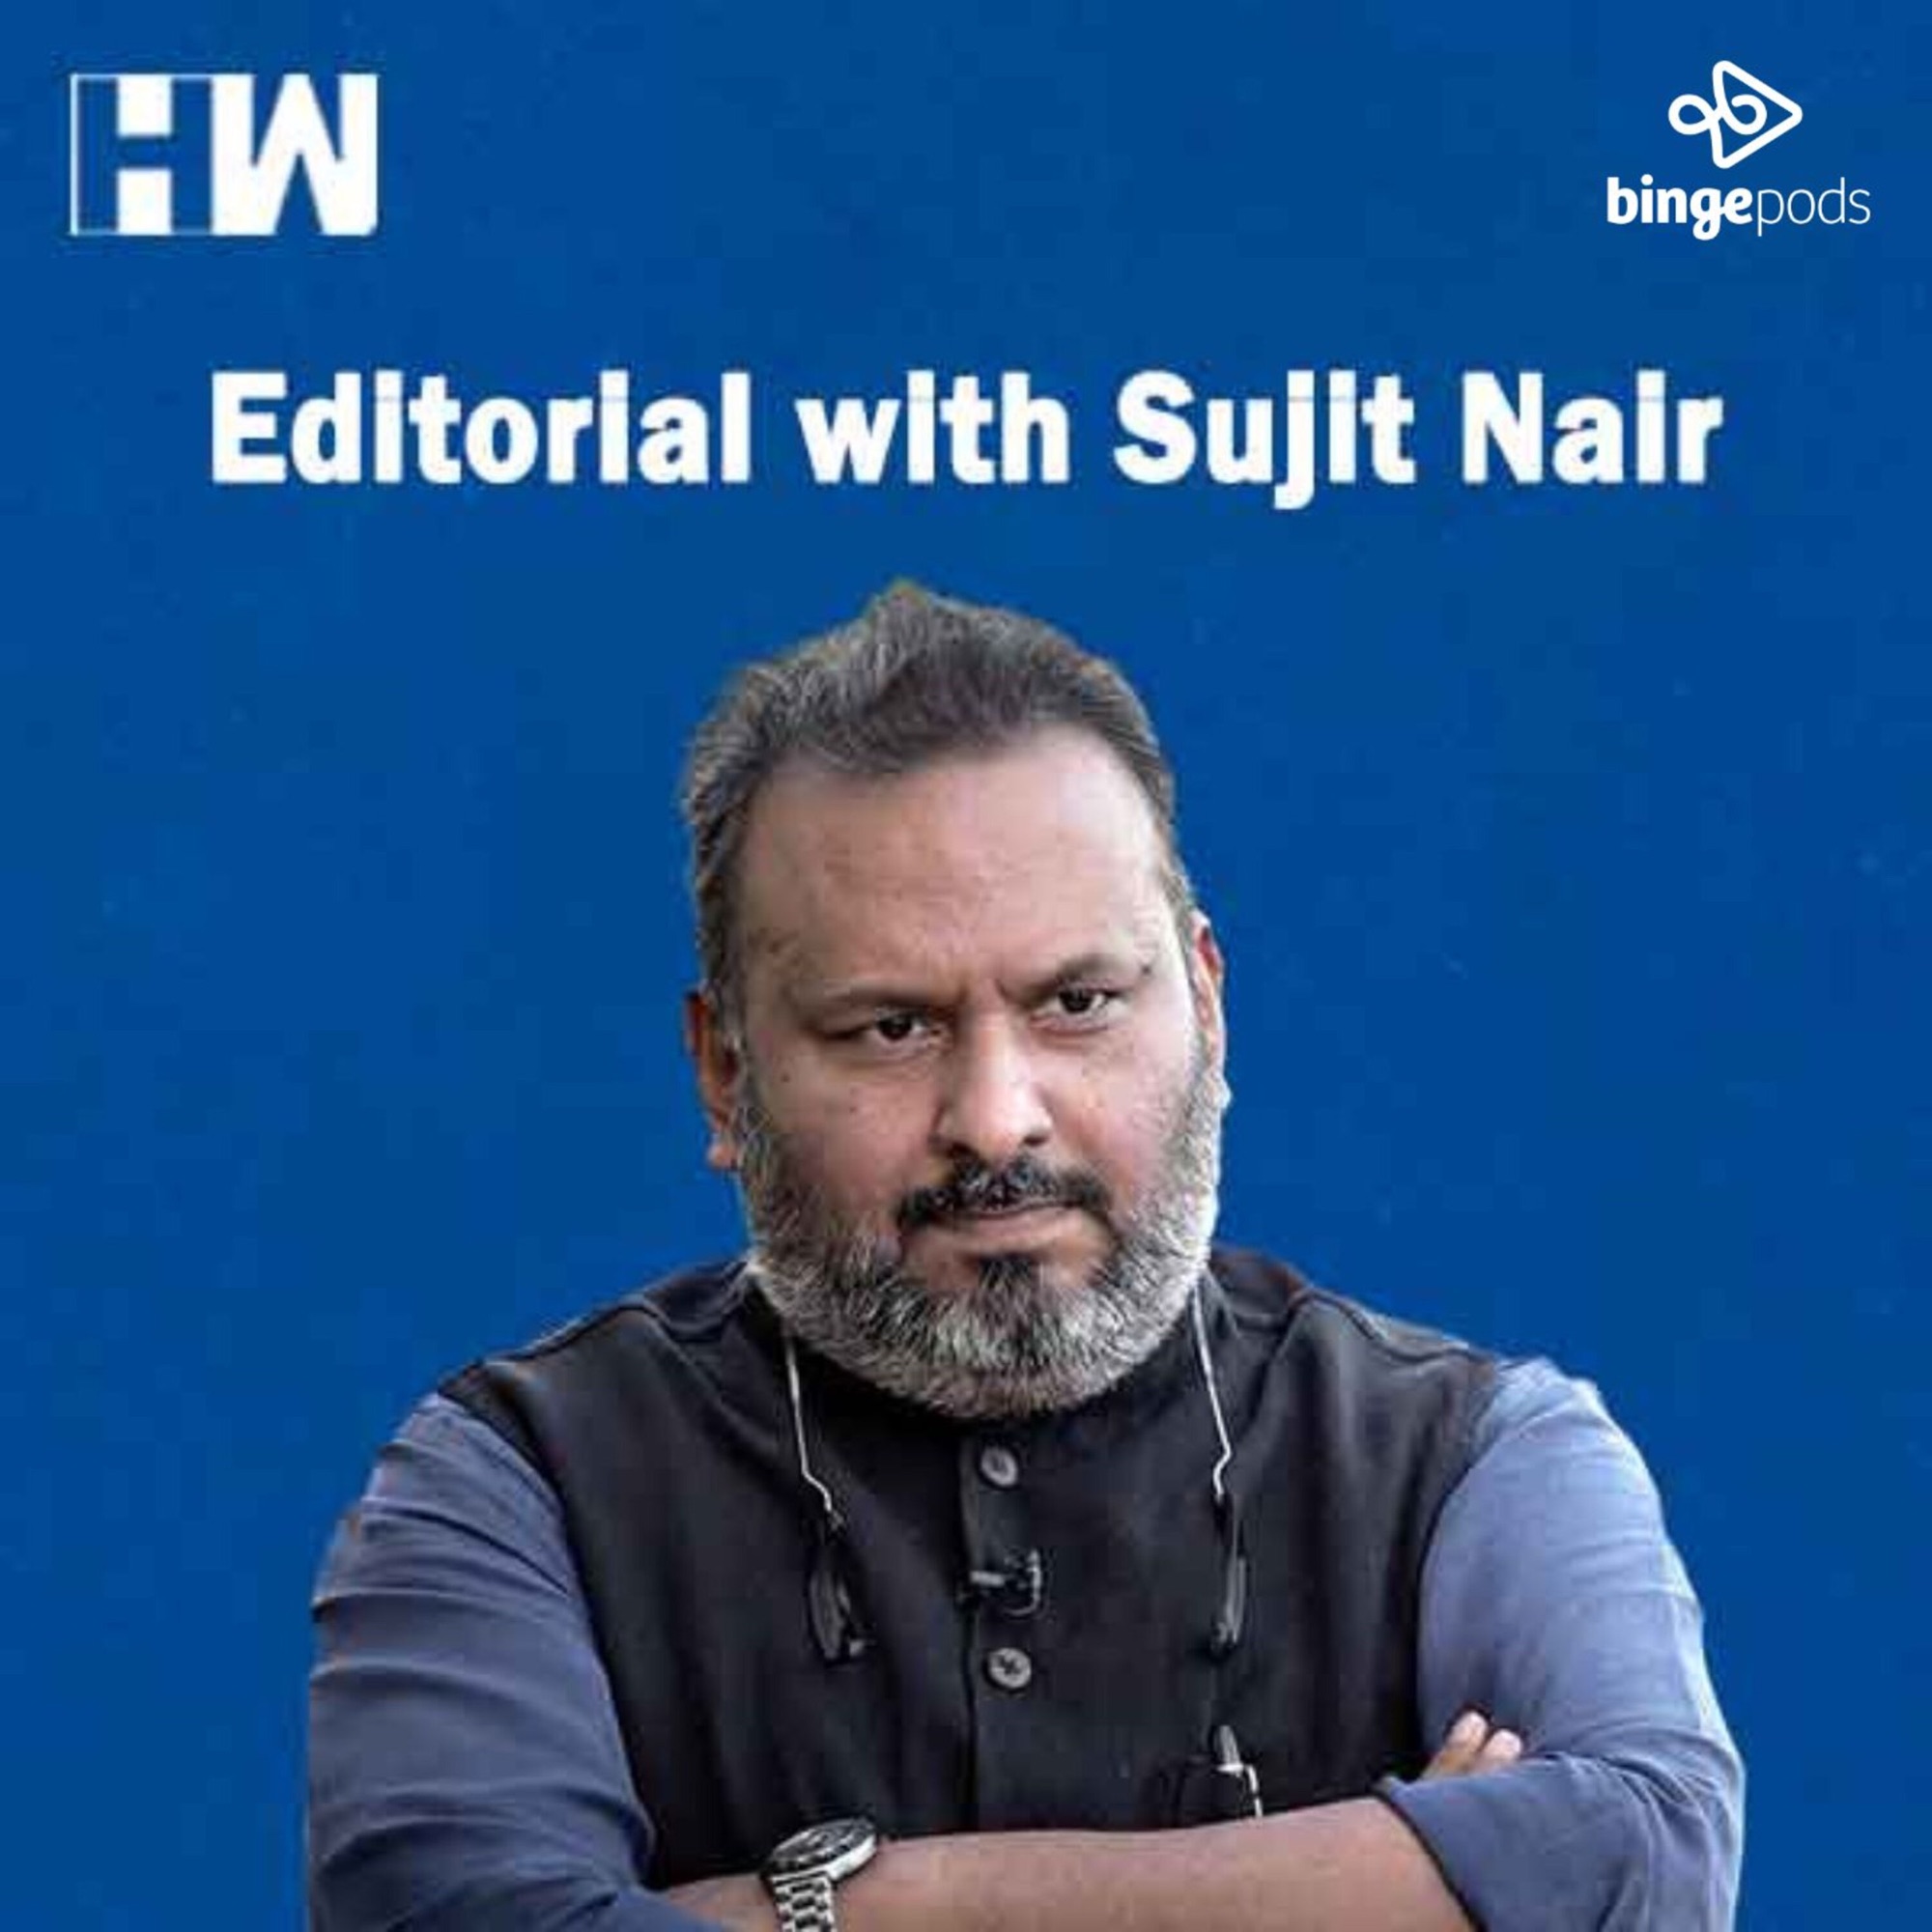 Editorial with Sujit Nair: Who is more popular? - NDTV CSDS survey – HW ...